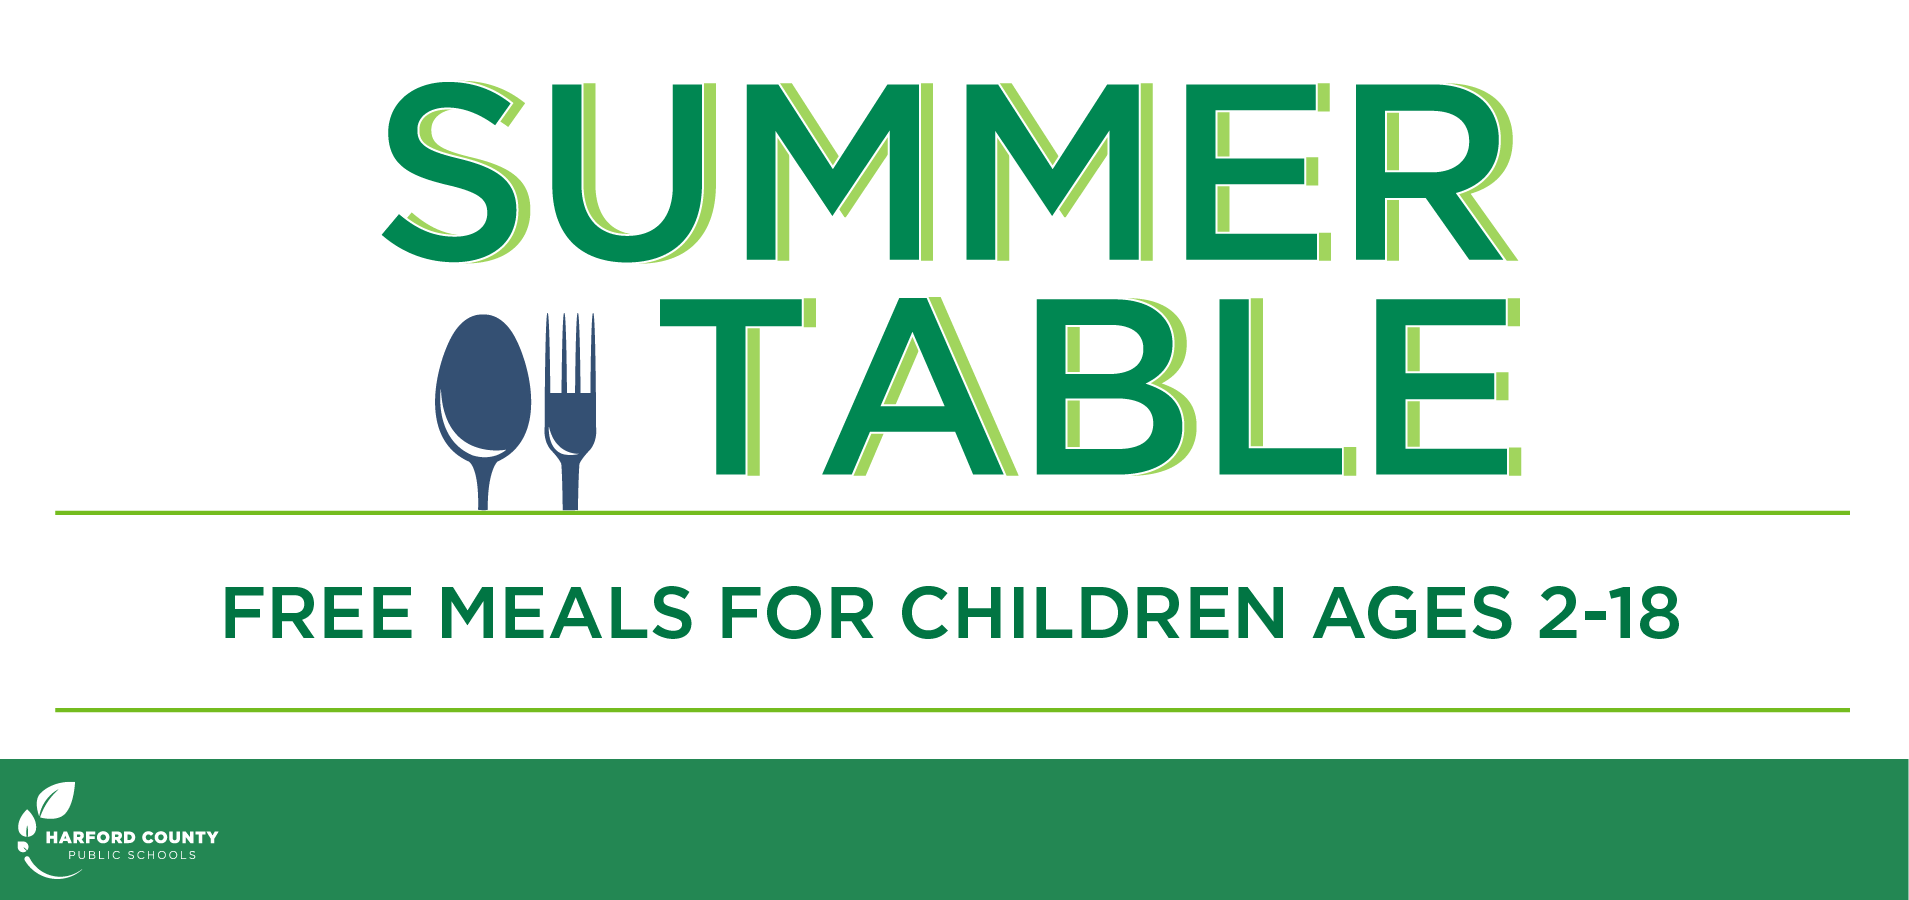 Summer Table: Free Meals for Children Ages 2-18